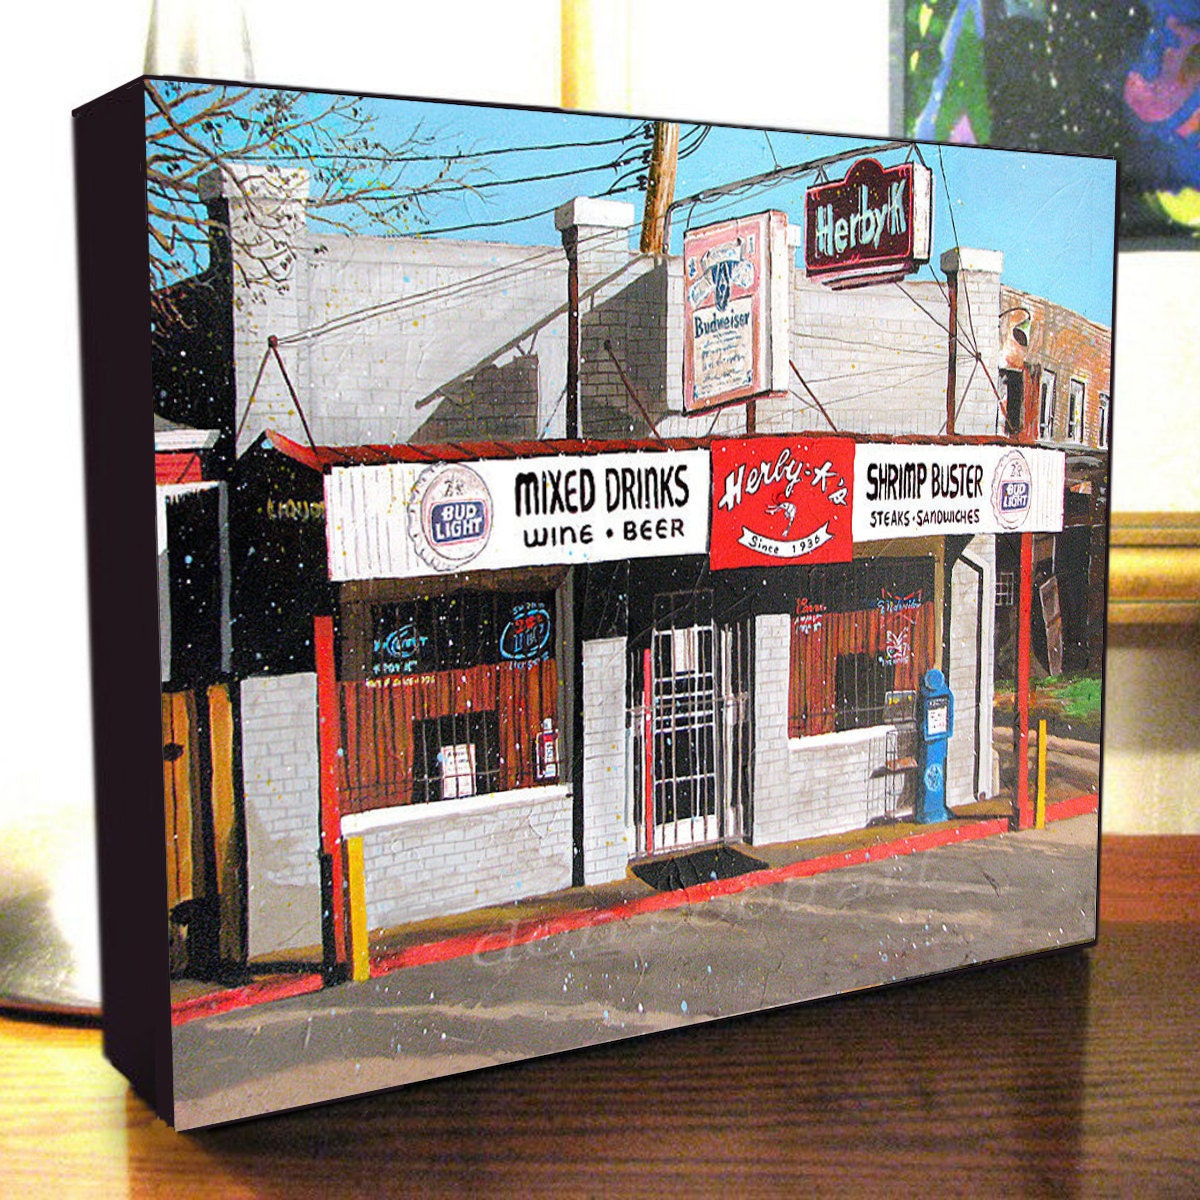 Seafood Cafe Bar & Grill Restaurant Art Herby K's 8x10x1.5 11x14x1.5 Gallery Wrap Canvas Print"